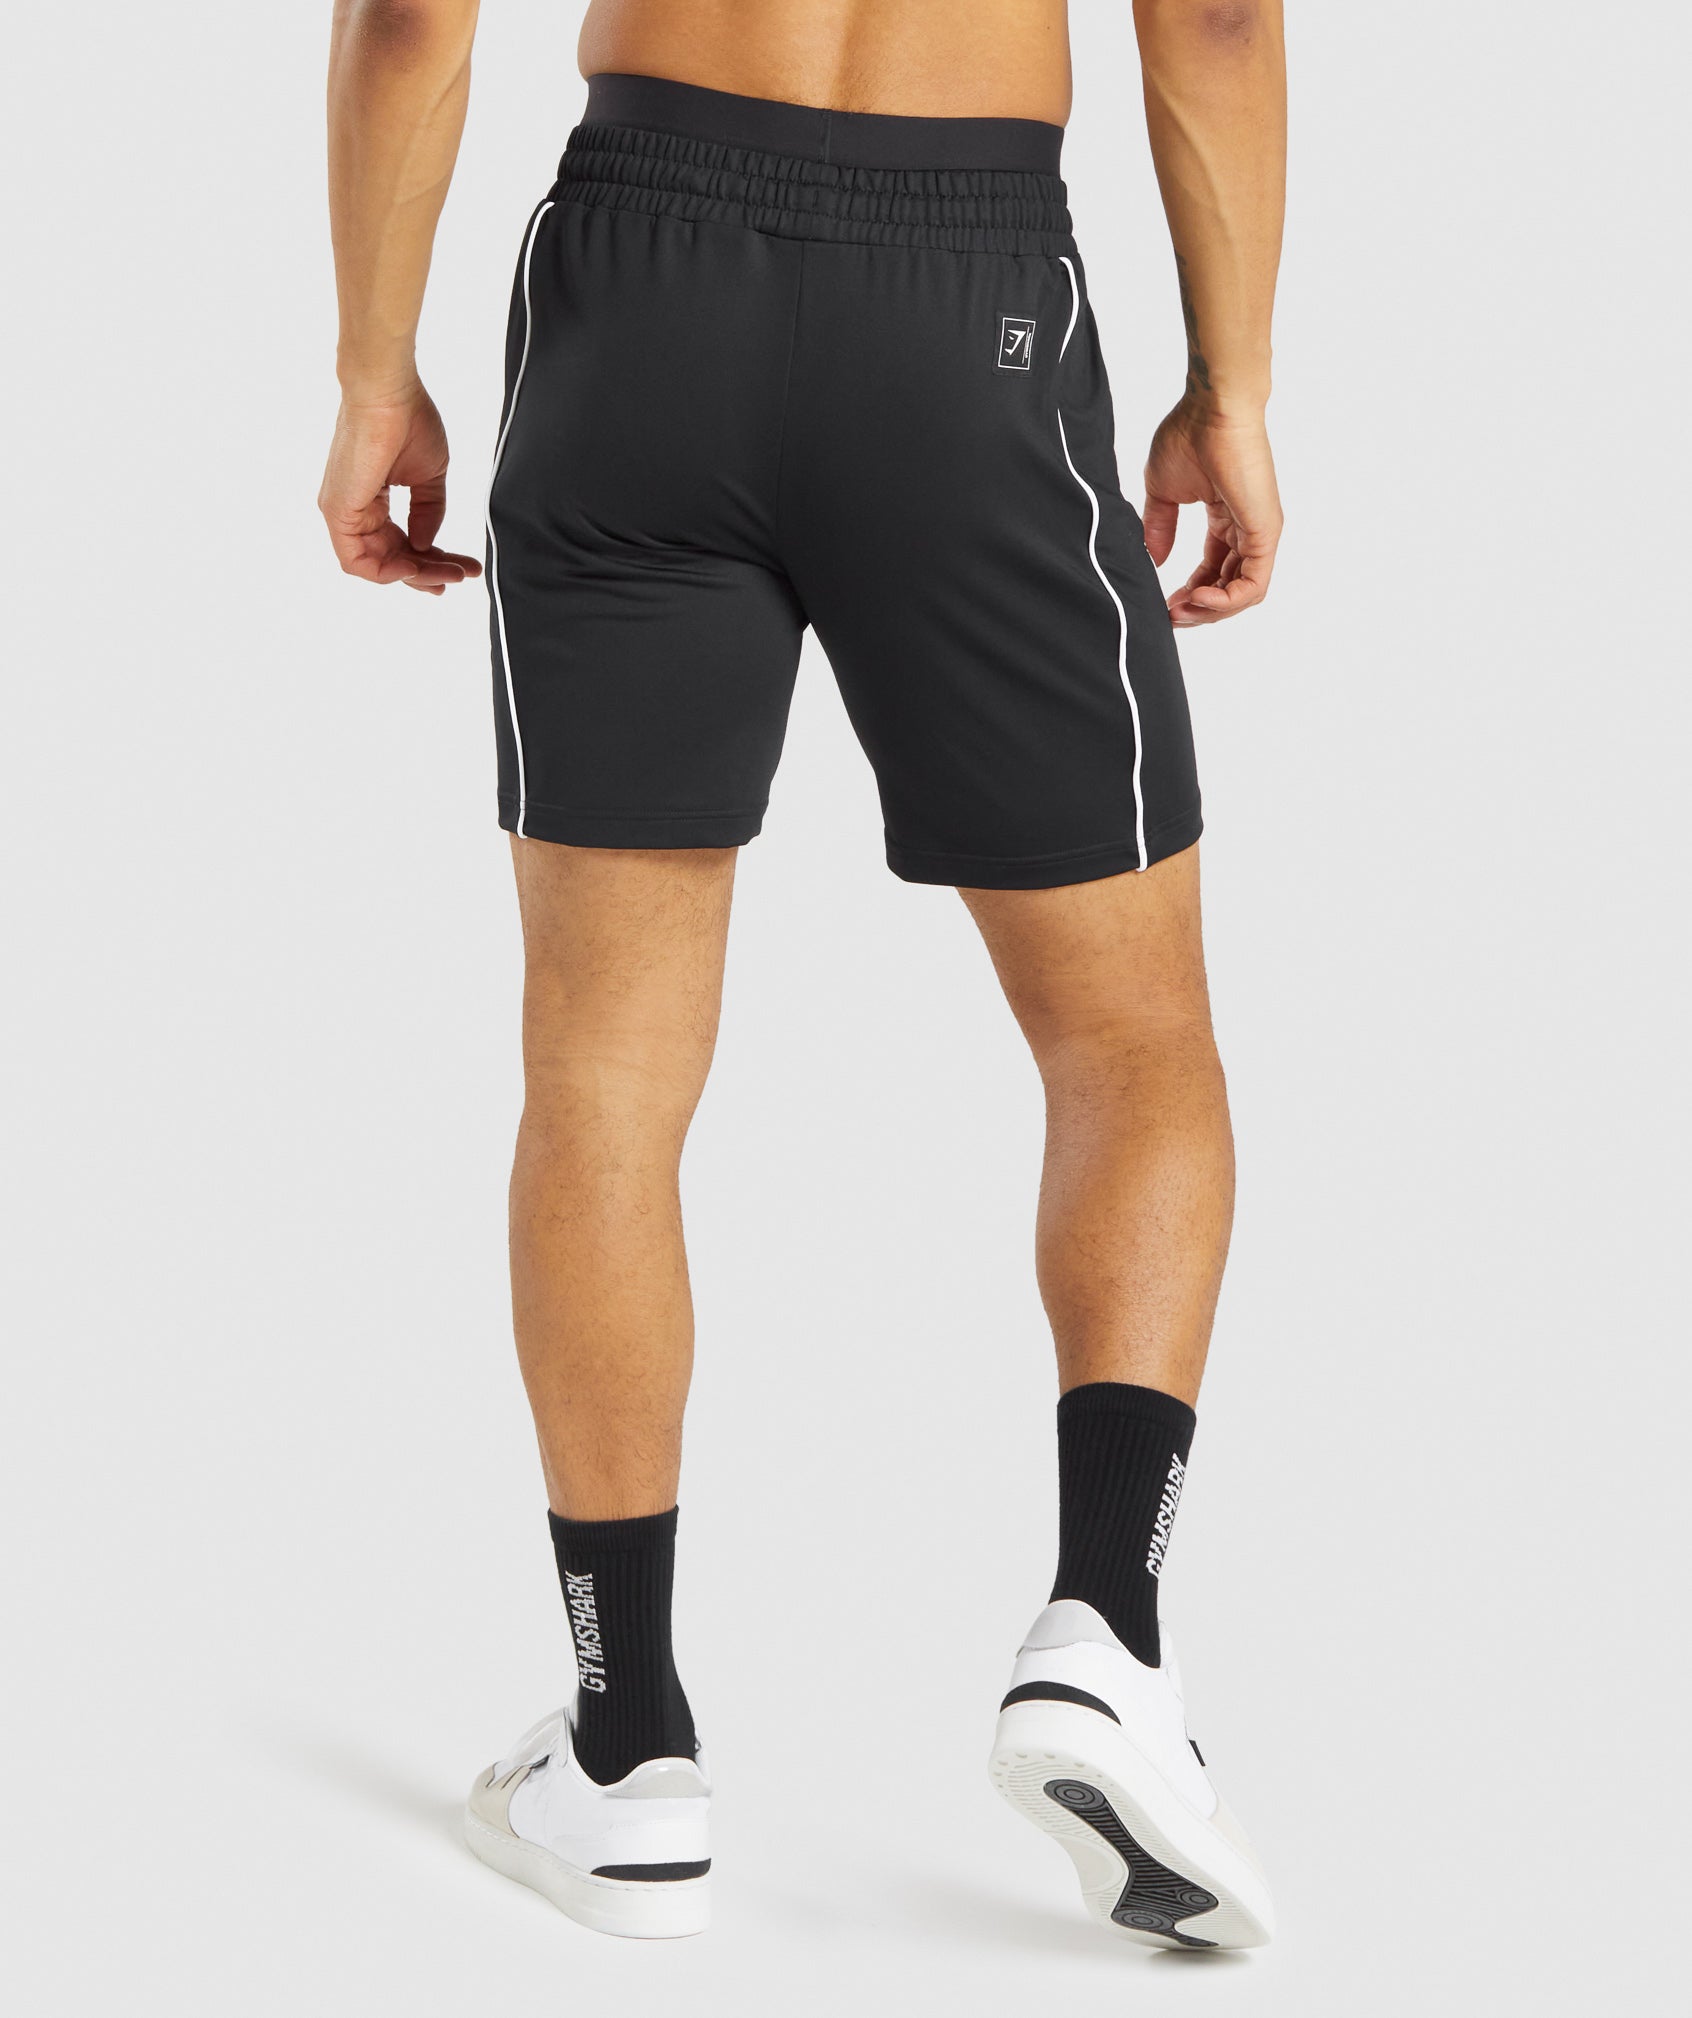 Recess Shorts in Black - view 4